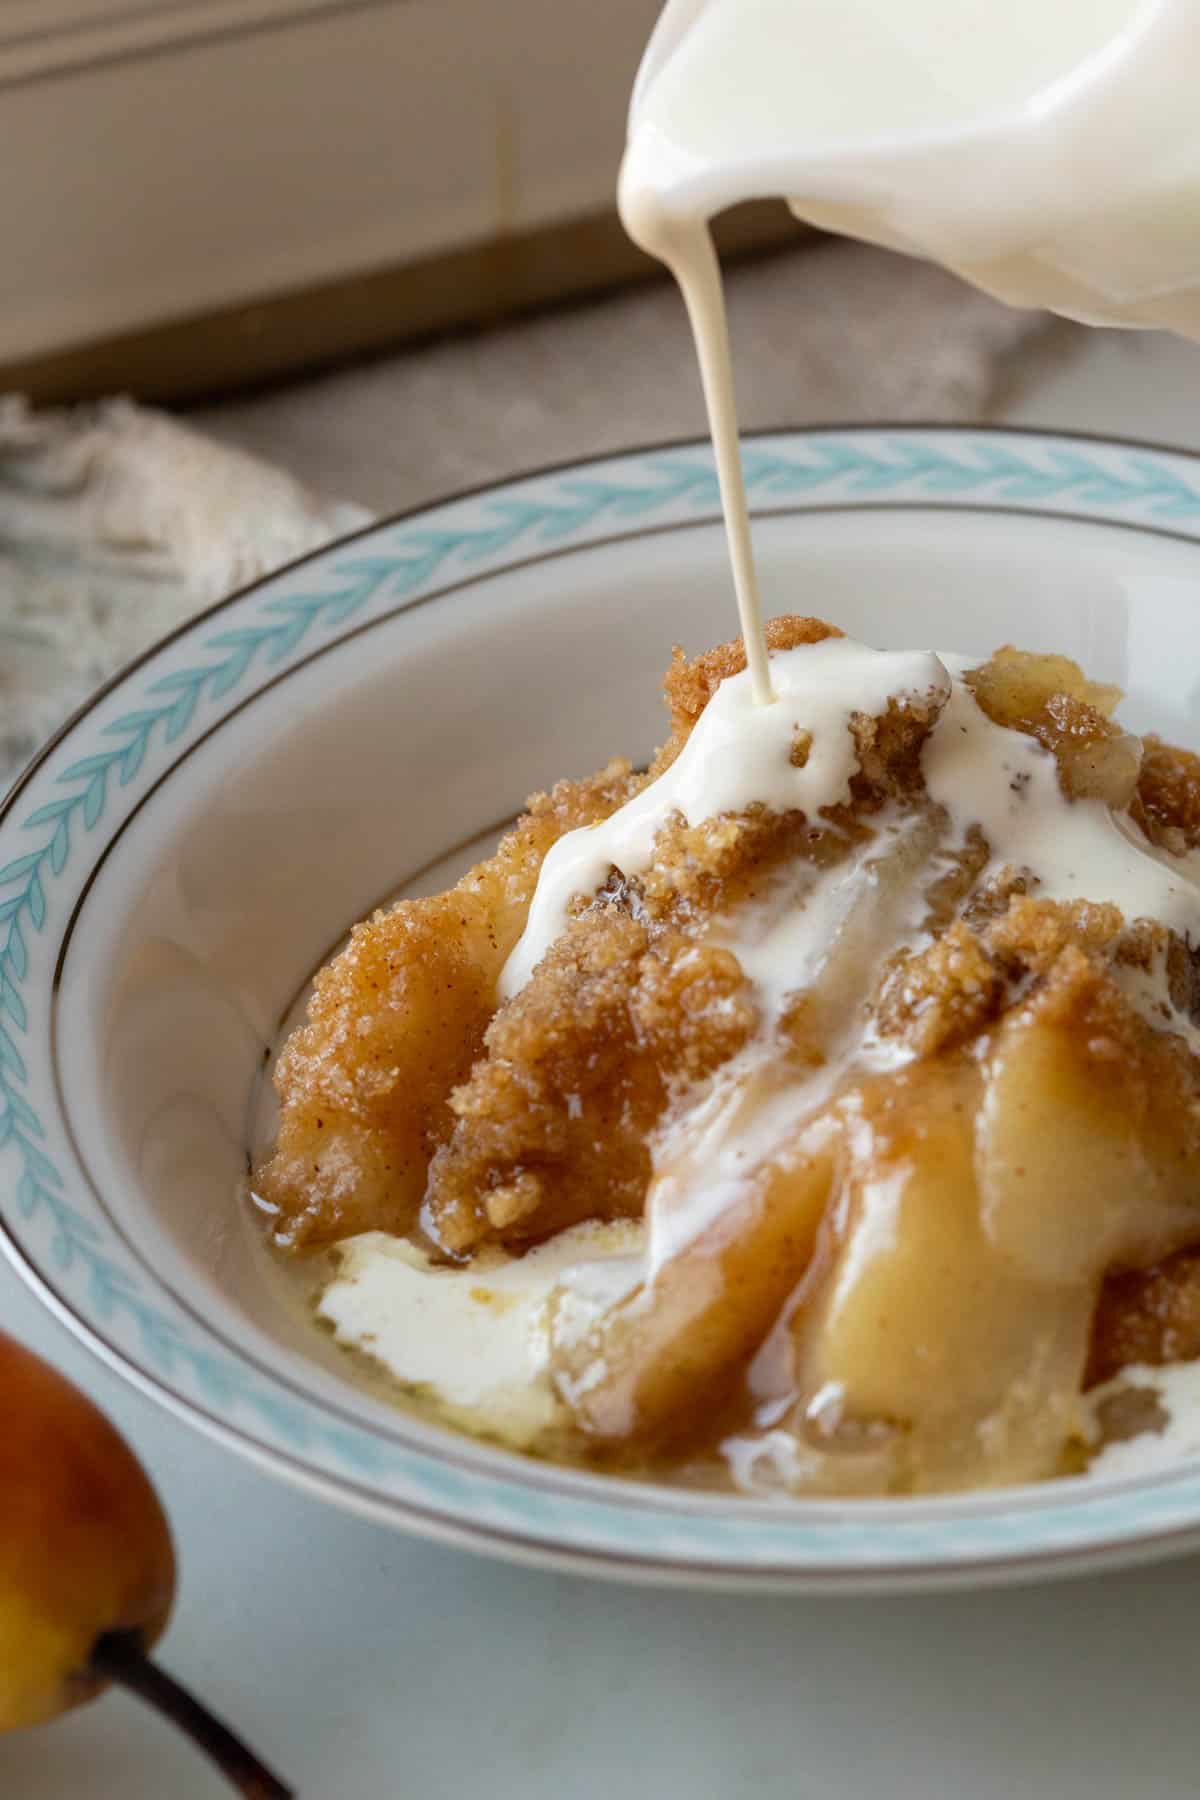 A small pitcher of cream being drizzled over a serving of Pear Crumble.